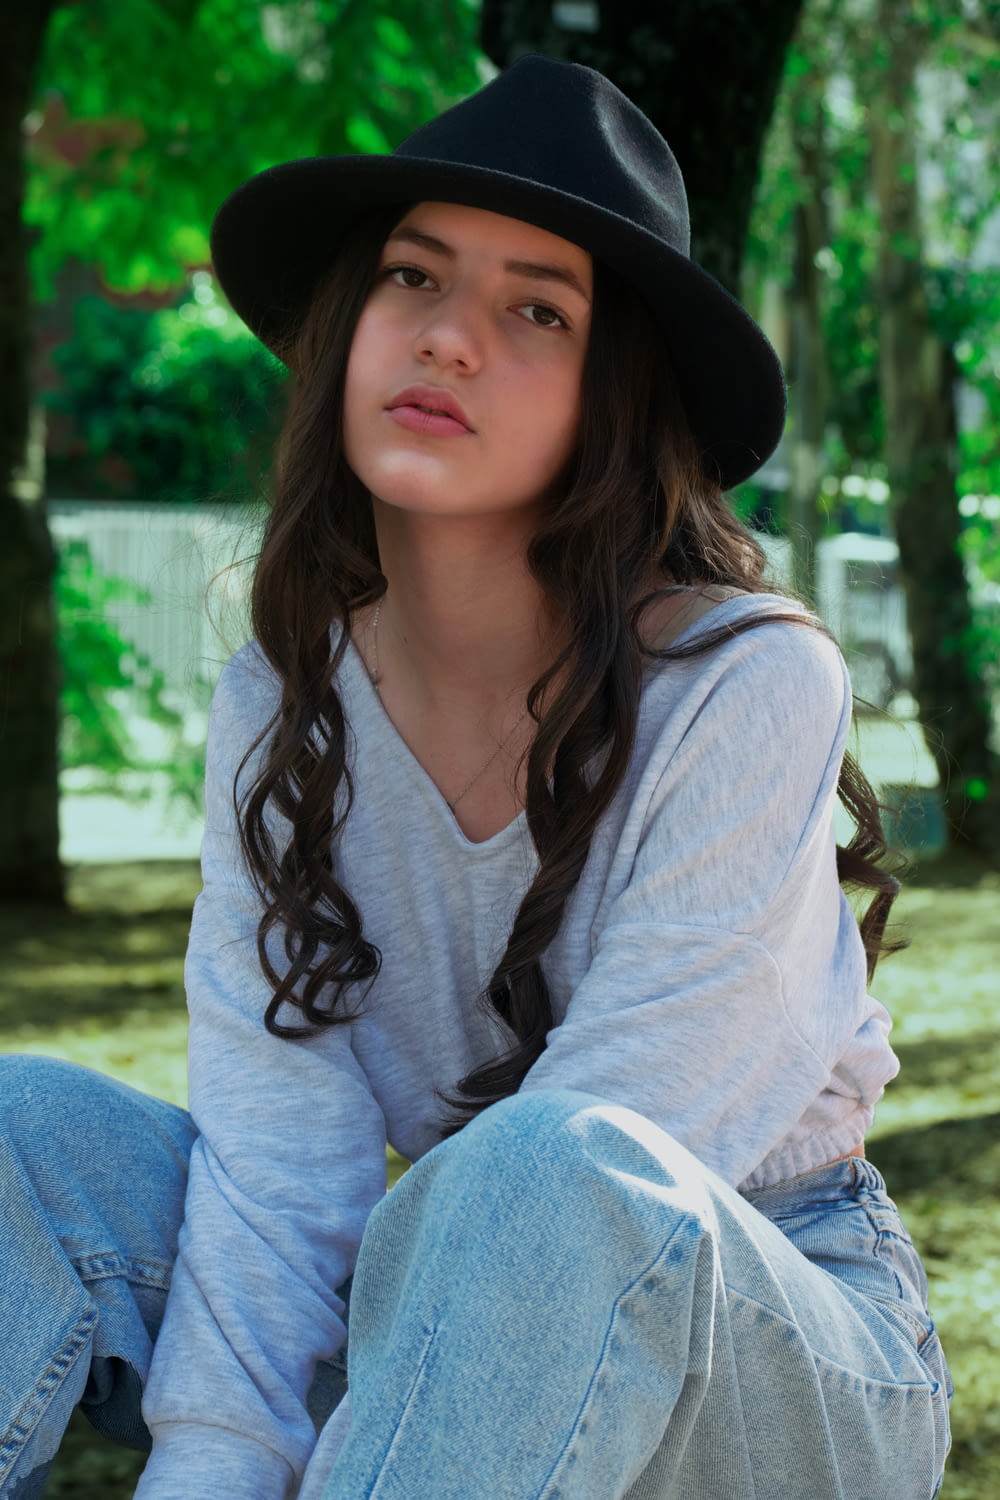 a girl wearing a black hat sitting on the ground